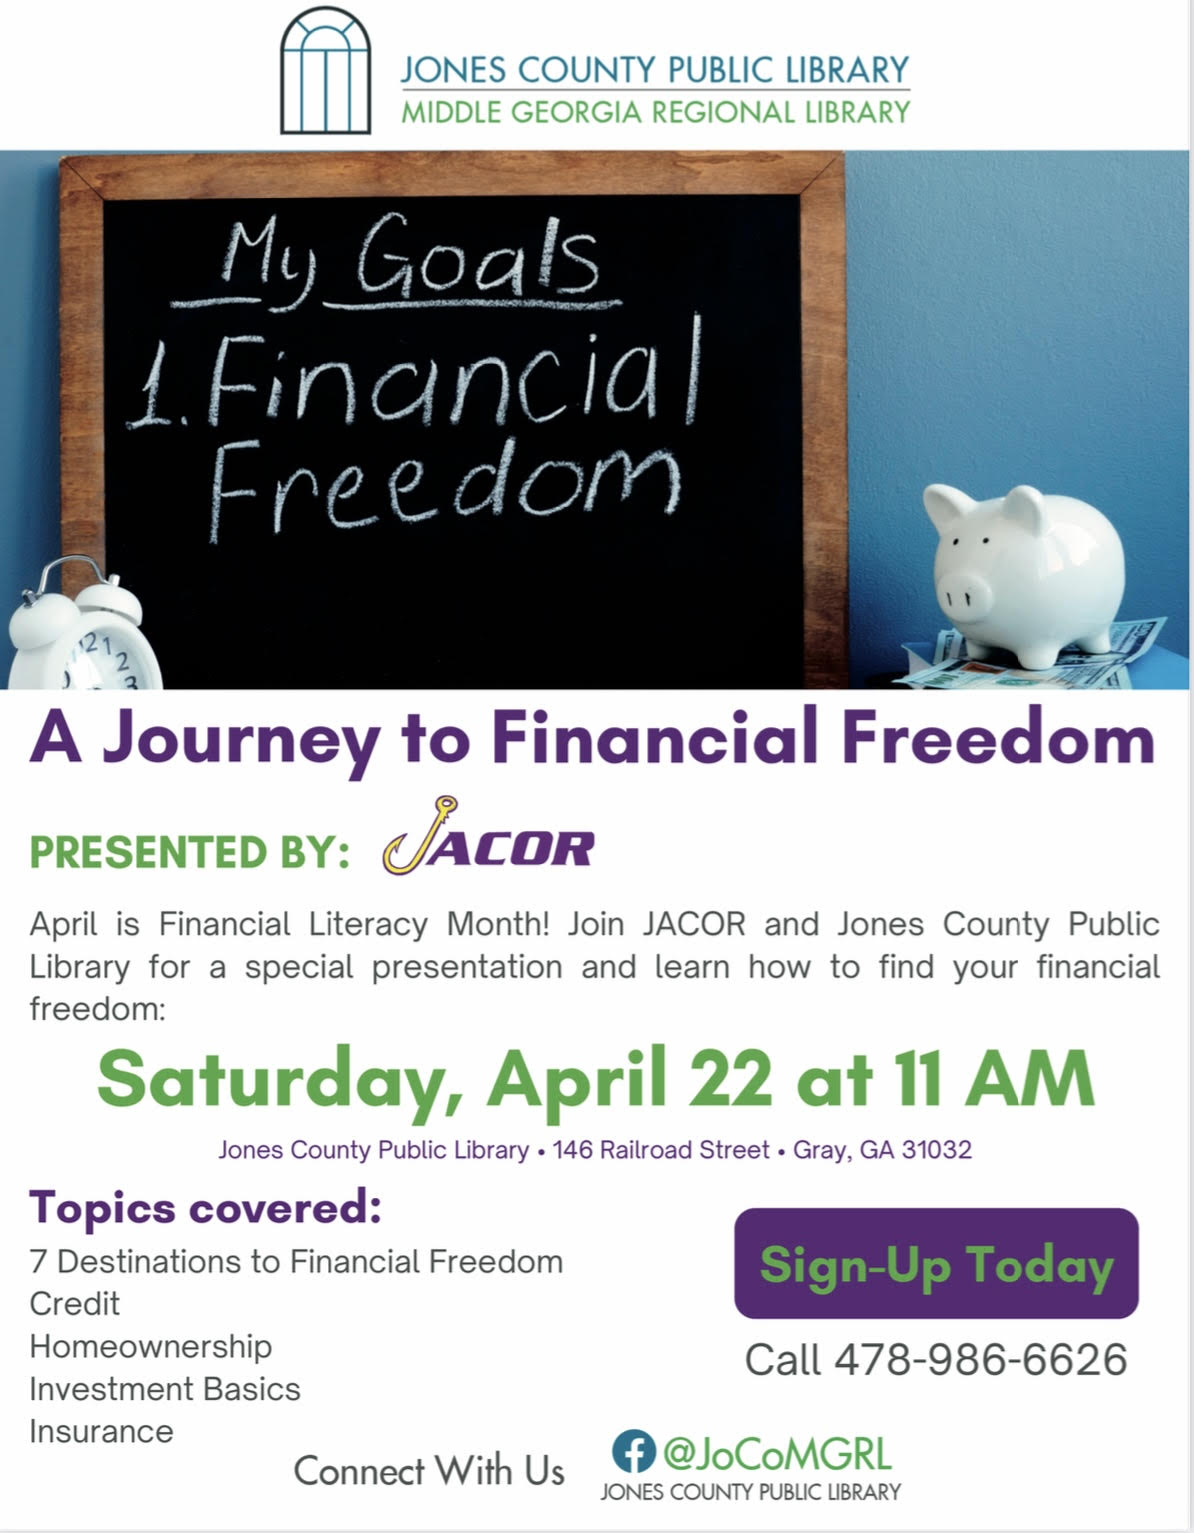 A Journey to Financial Freedom Event